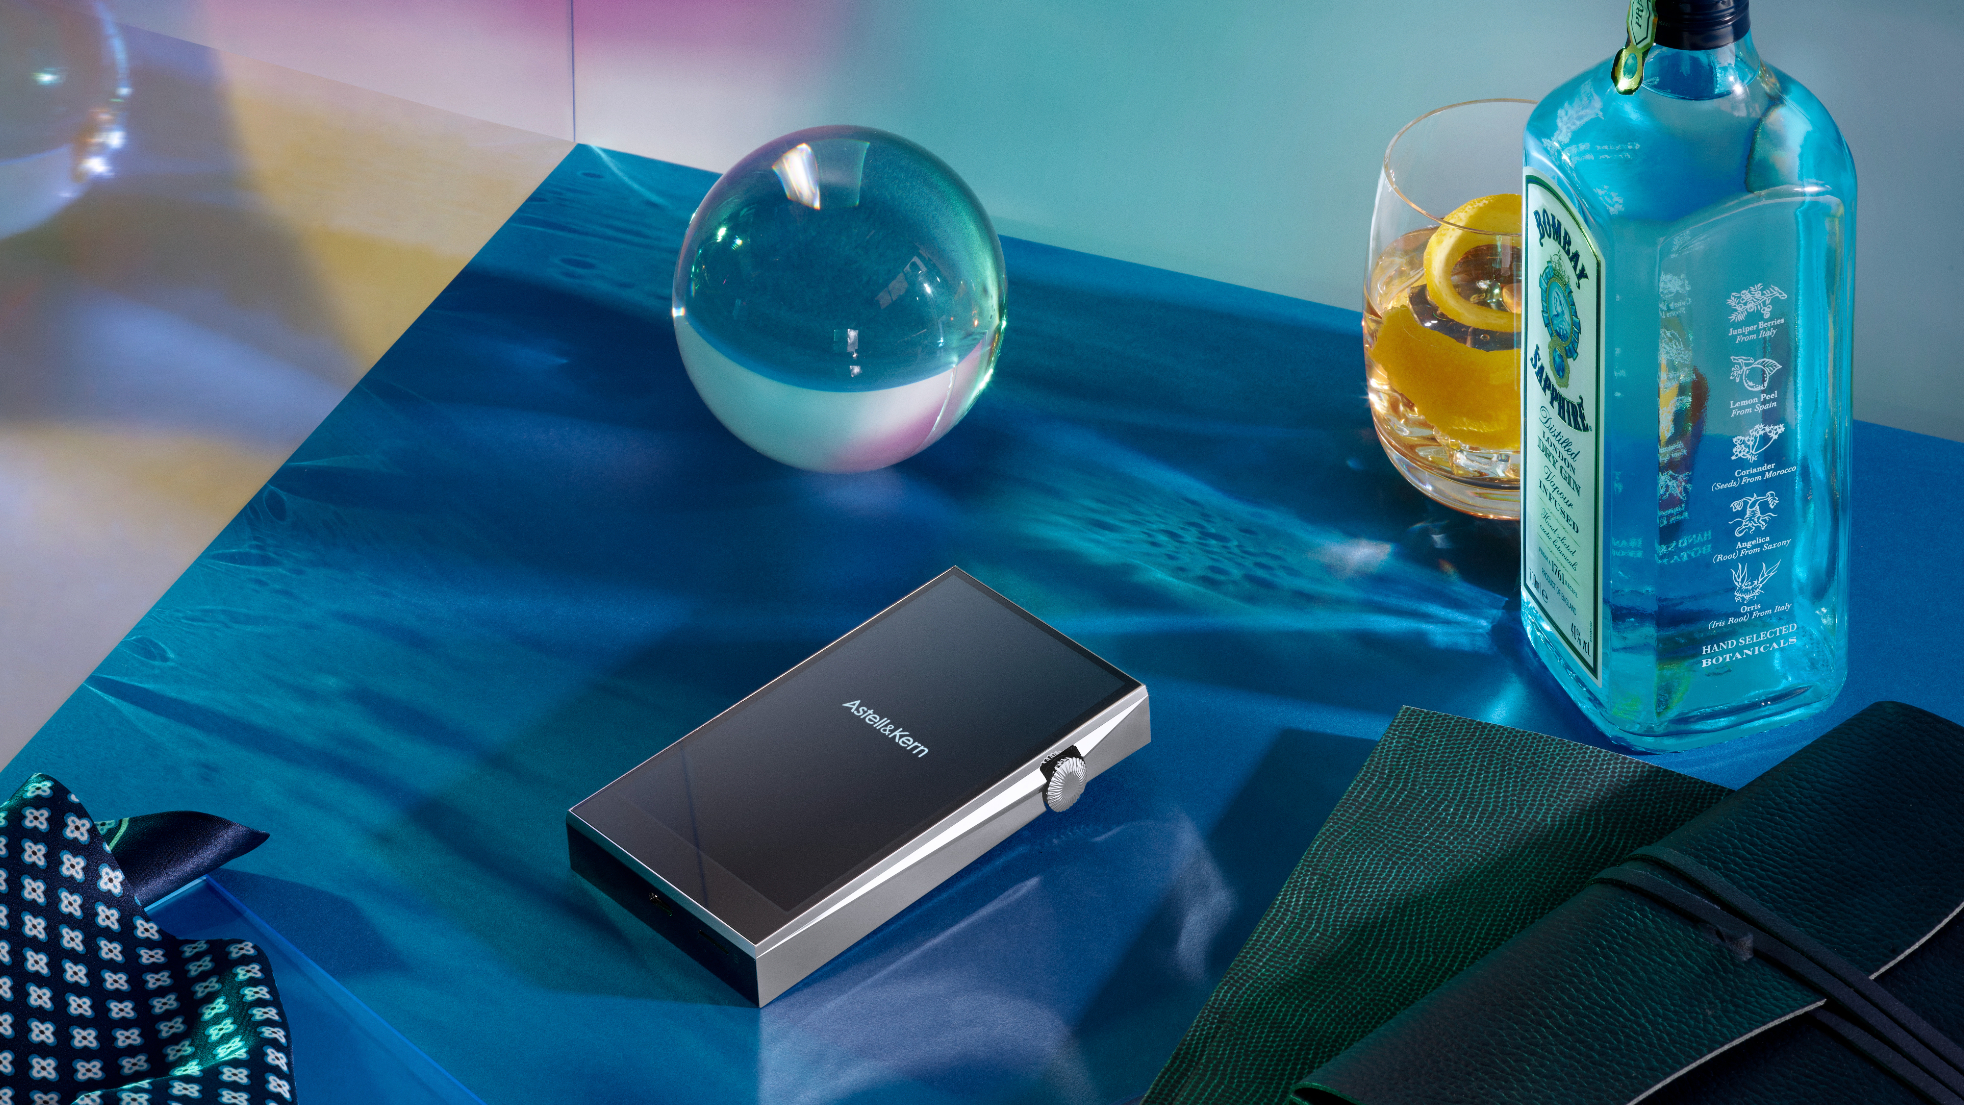 Astell & Kern's A&ultima SP3000 player next to a bottle of gin, on a blue table